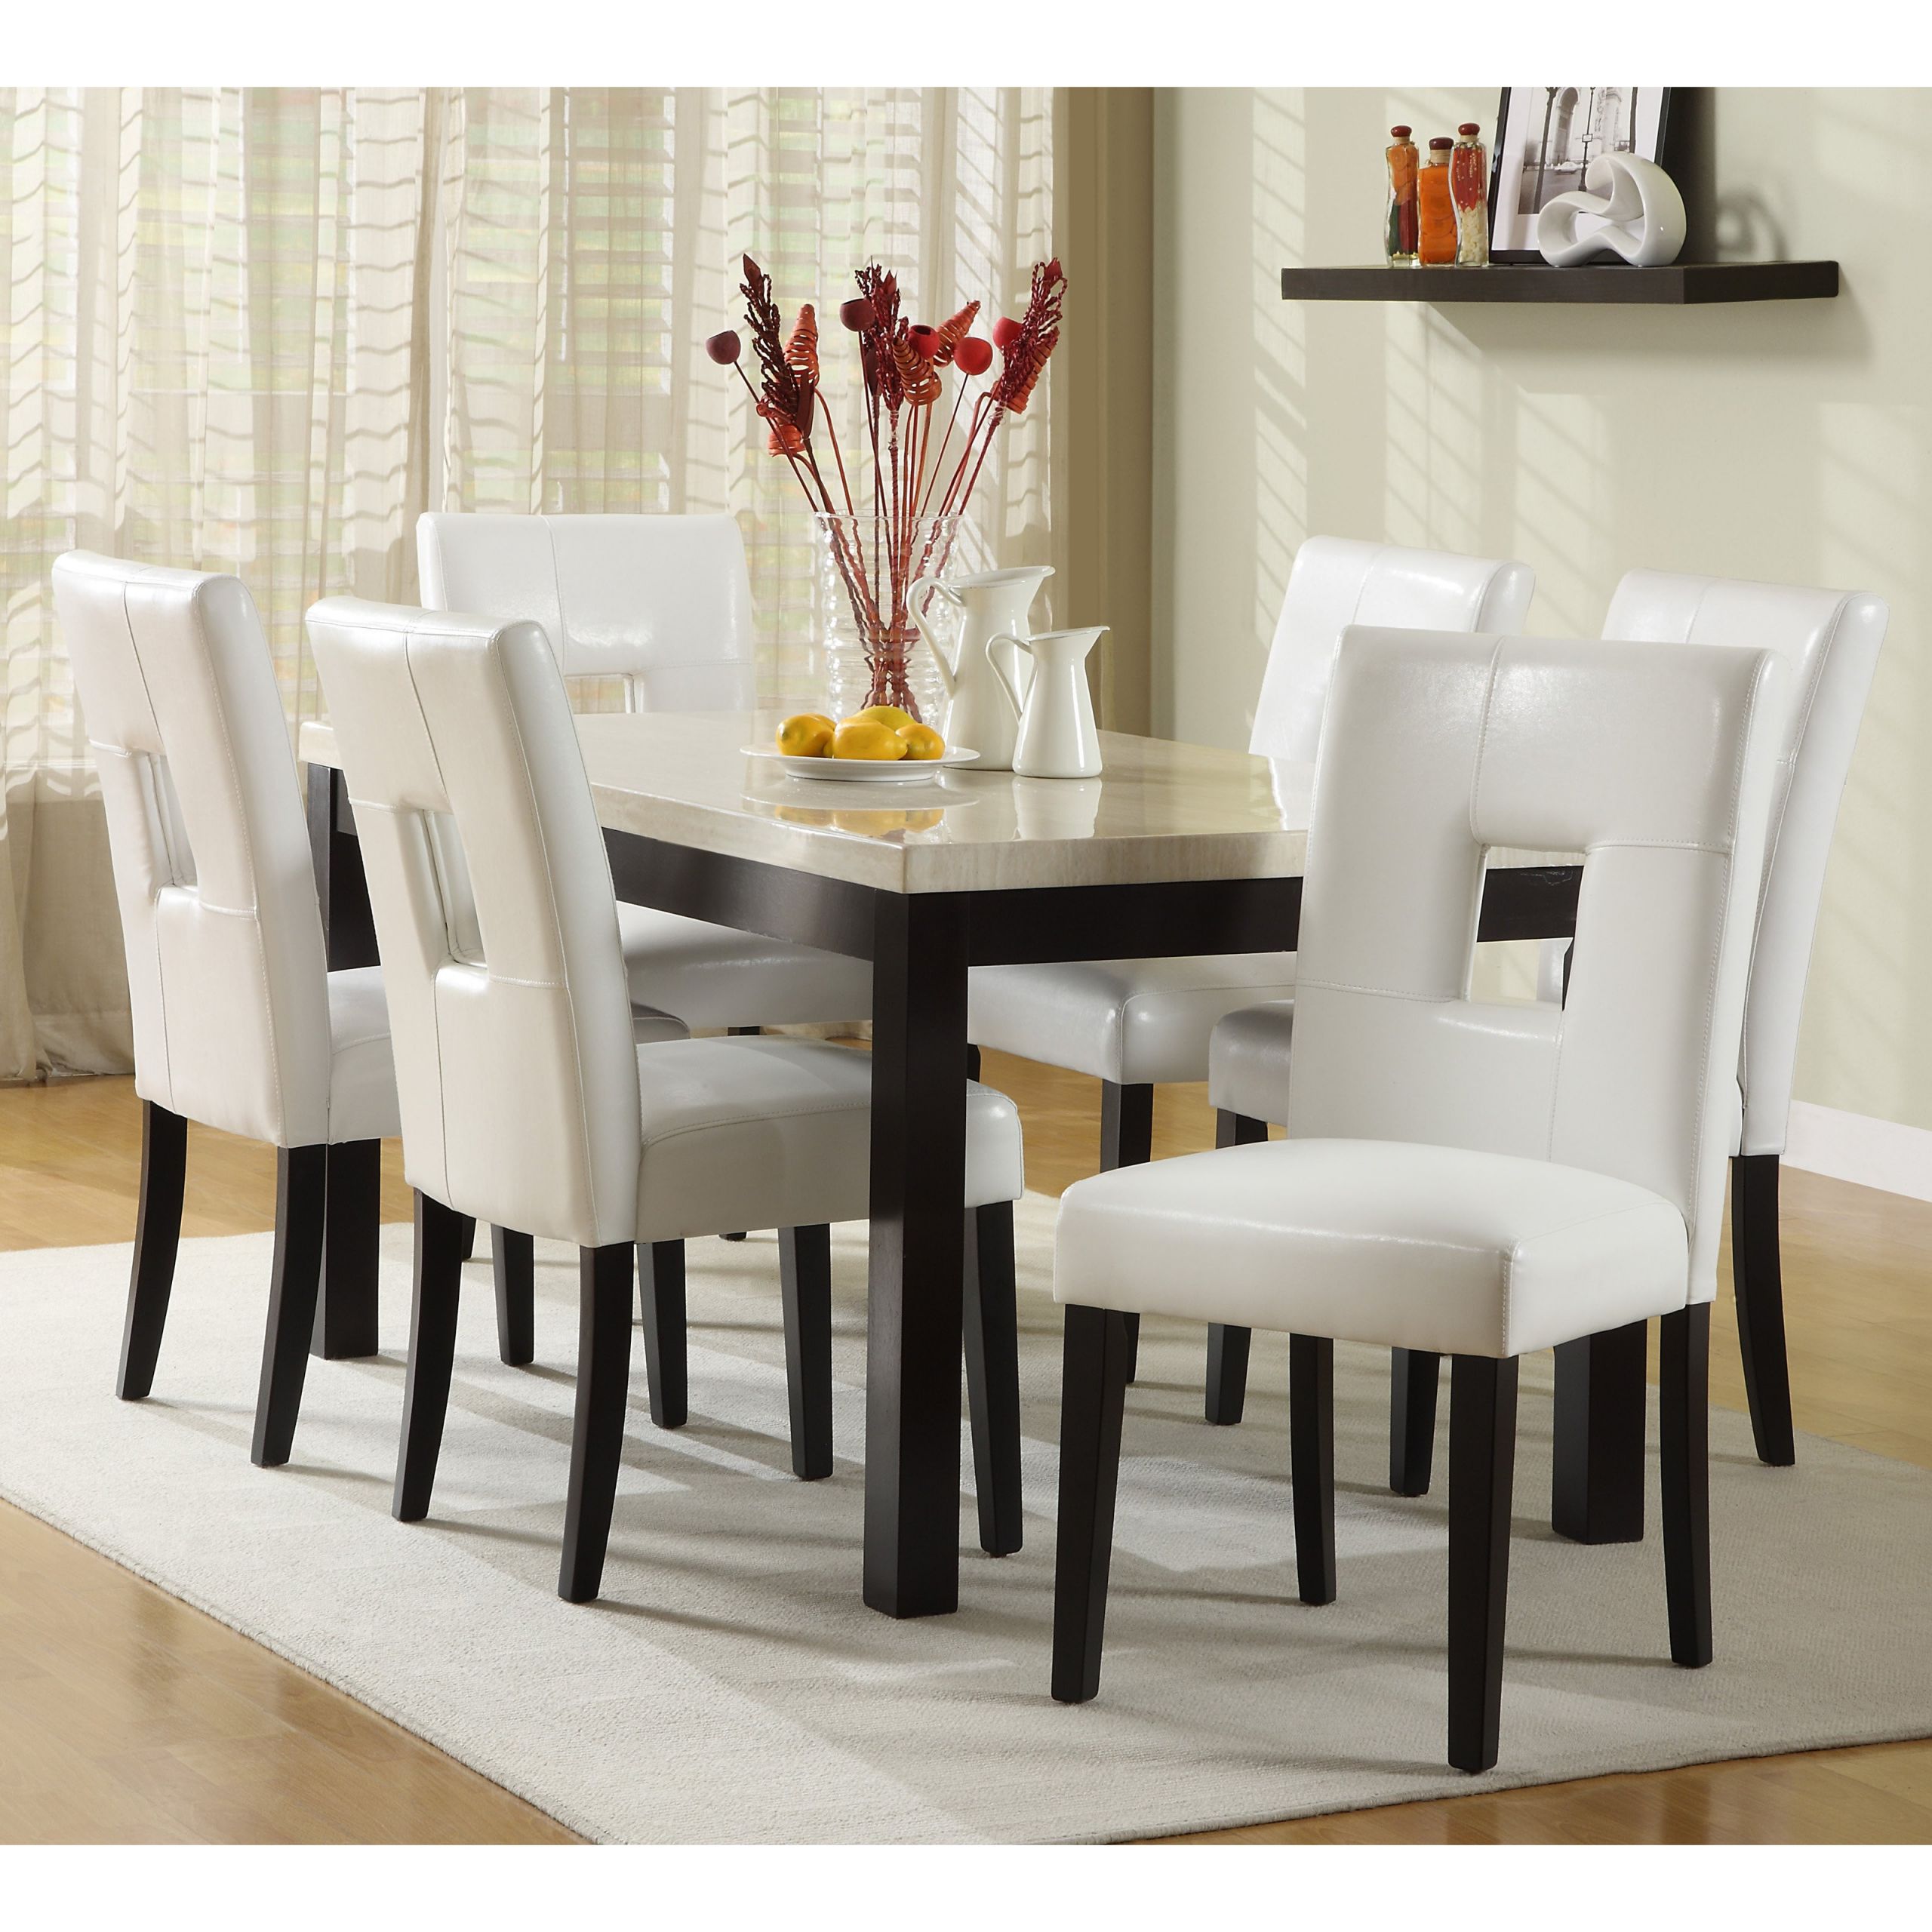 Black And White Kitchen Table
 White Round Kitchen Table and Chairs Design